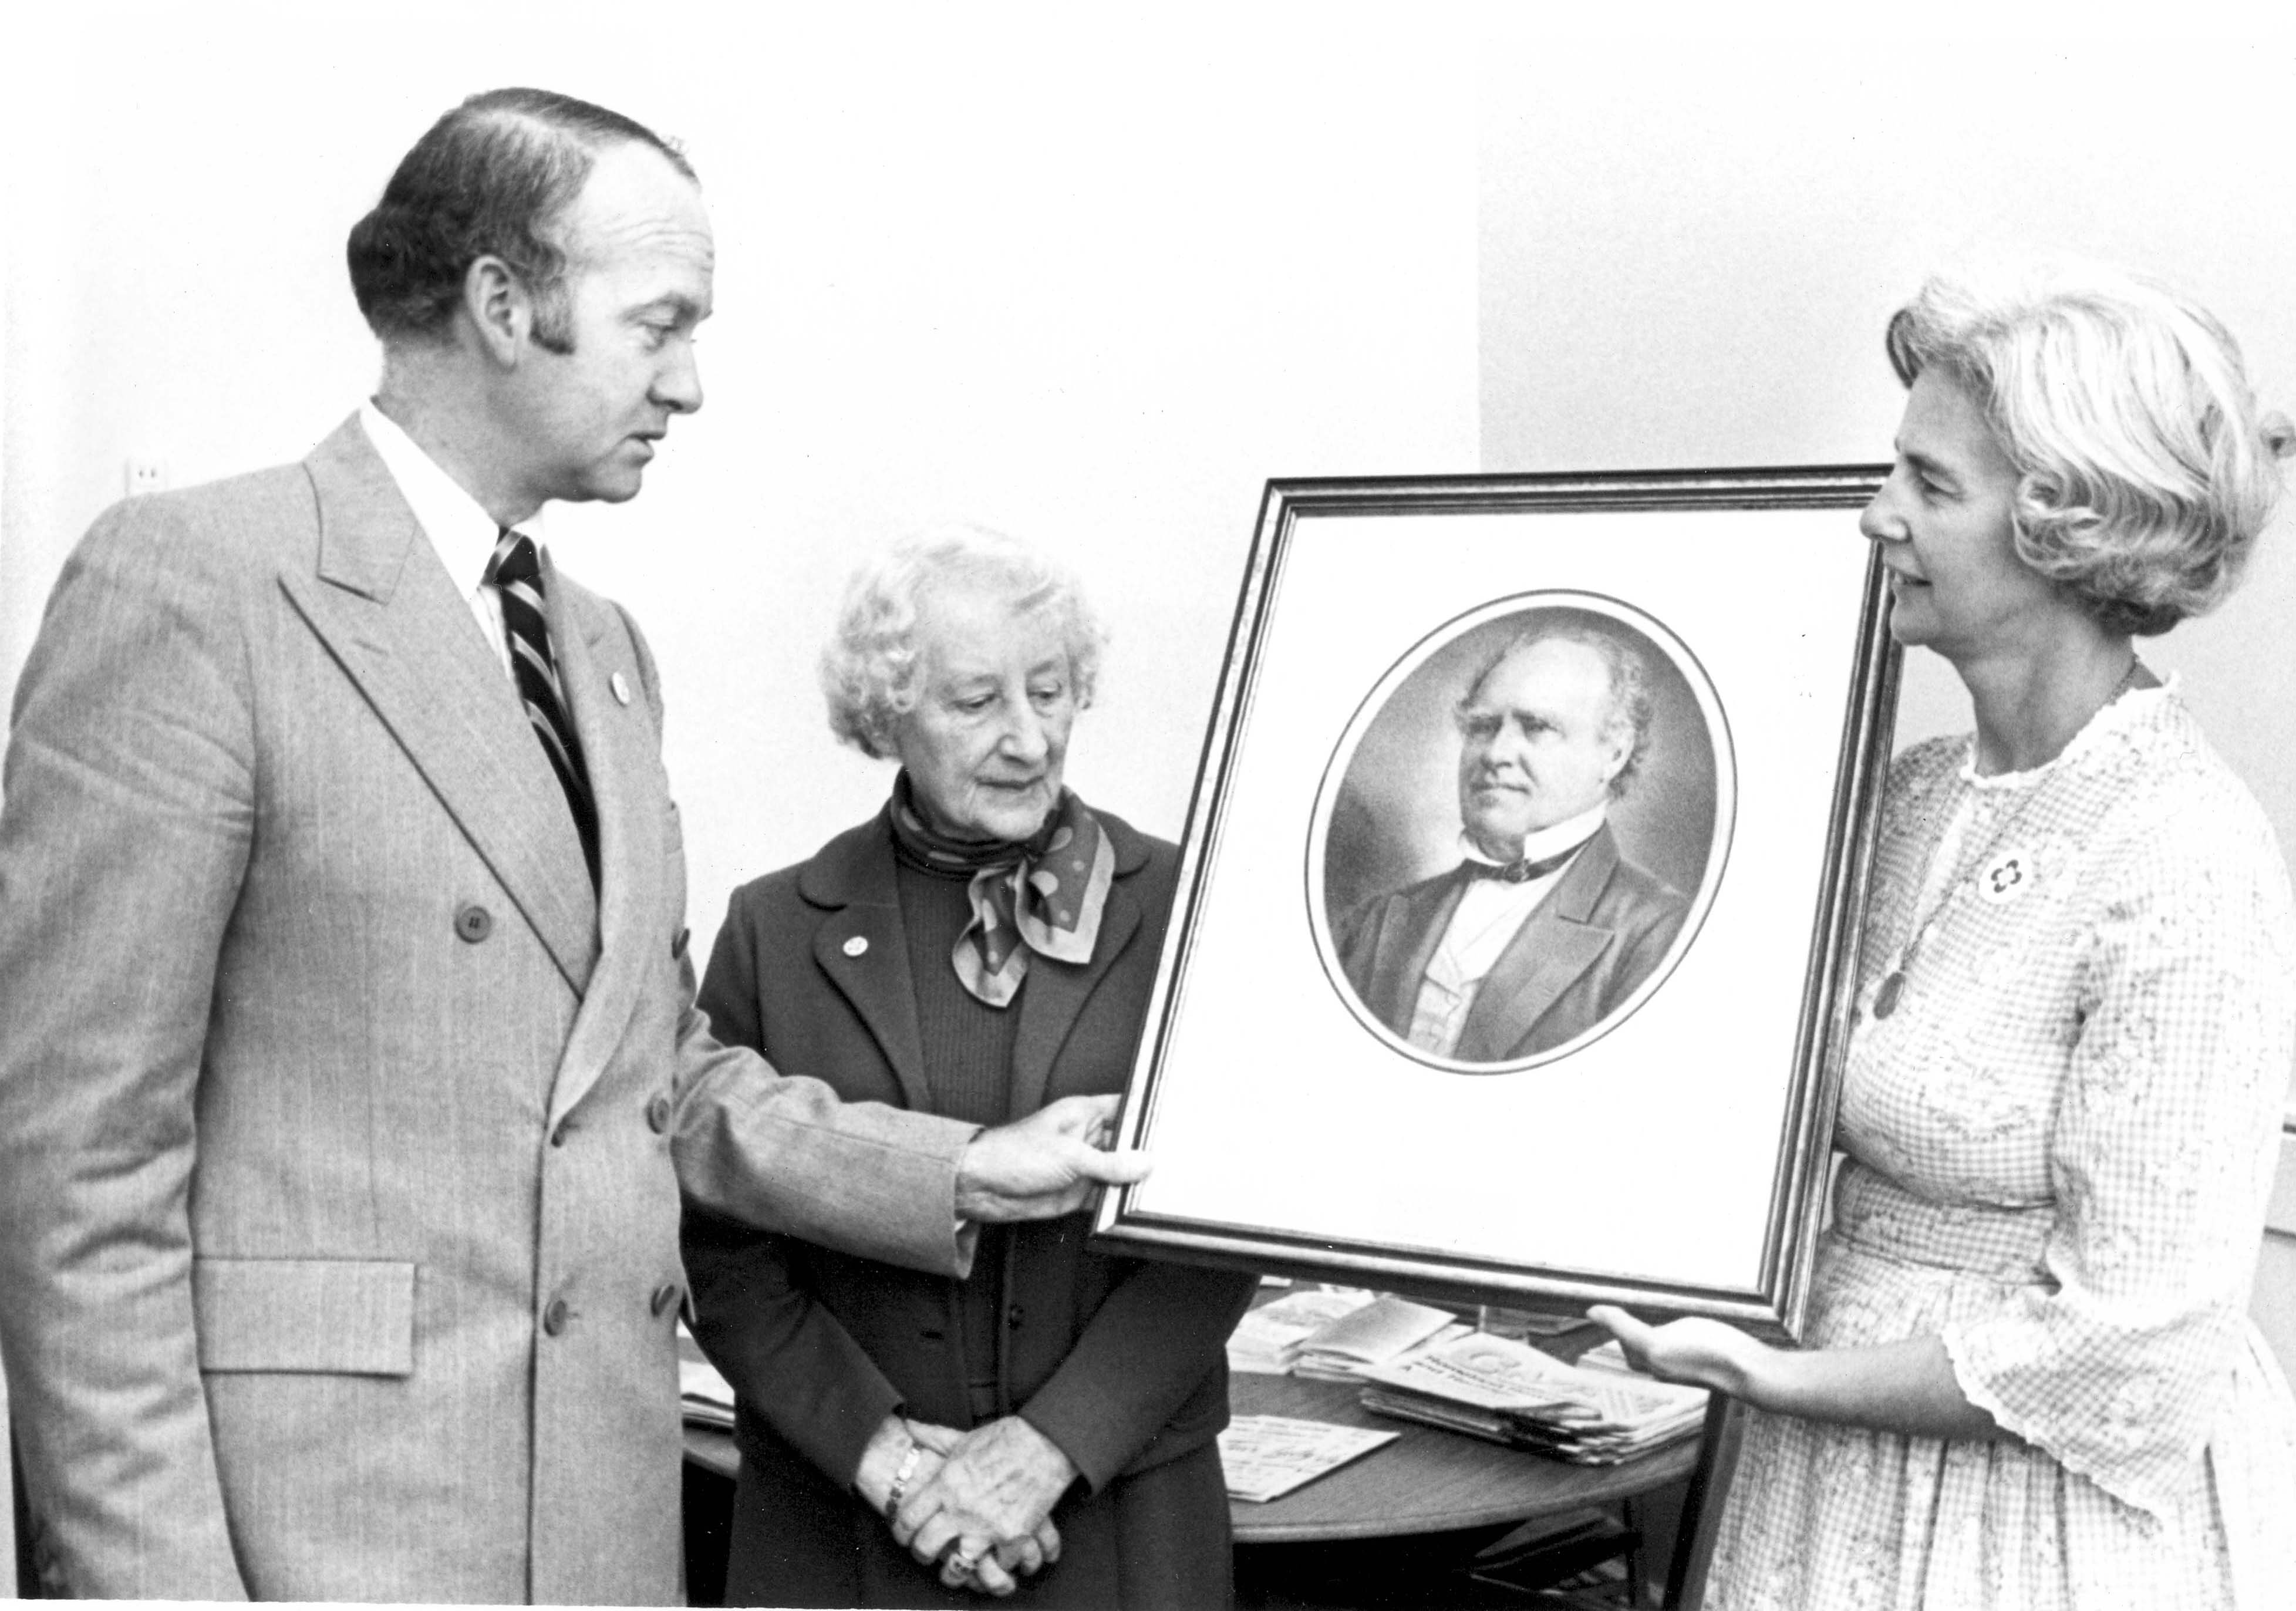 Black & white photo of an event for the ceremonial presentation of a portrait